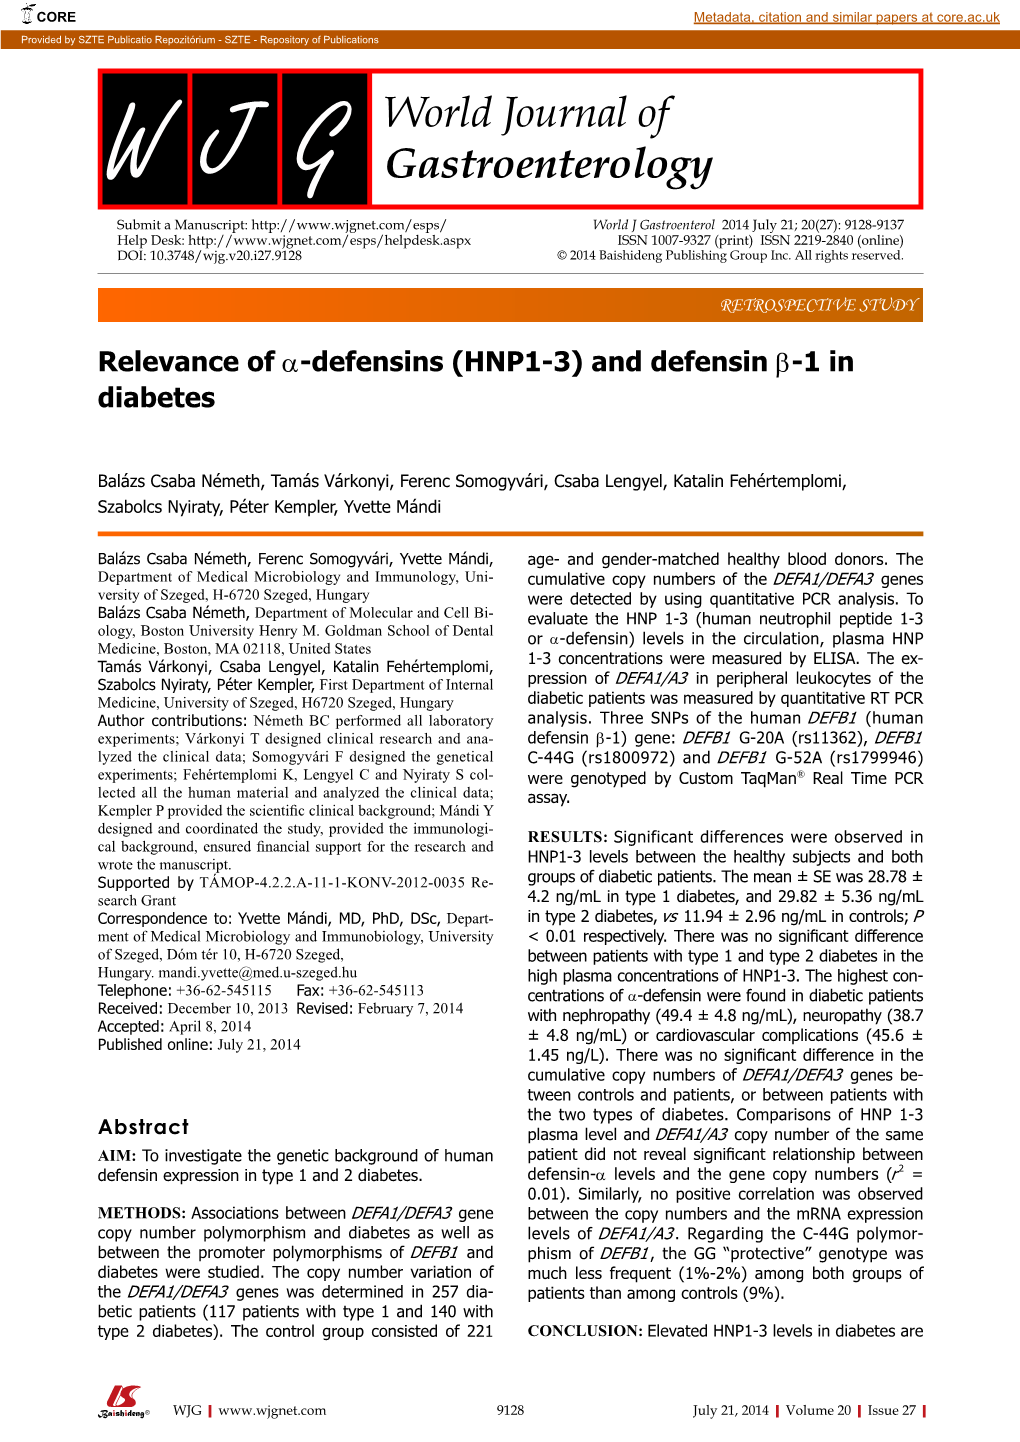 Relevance of Α-Defensins (HNP1-3) and Defensin Β-1 in Diabetes